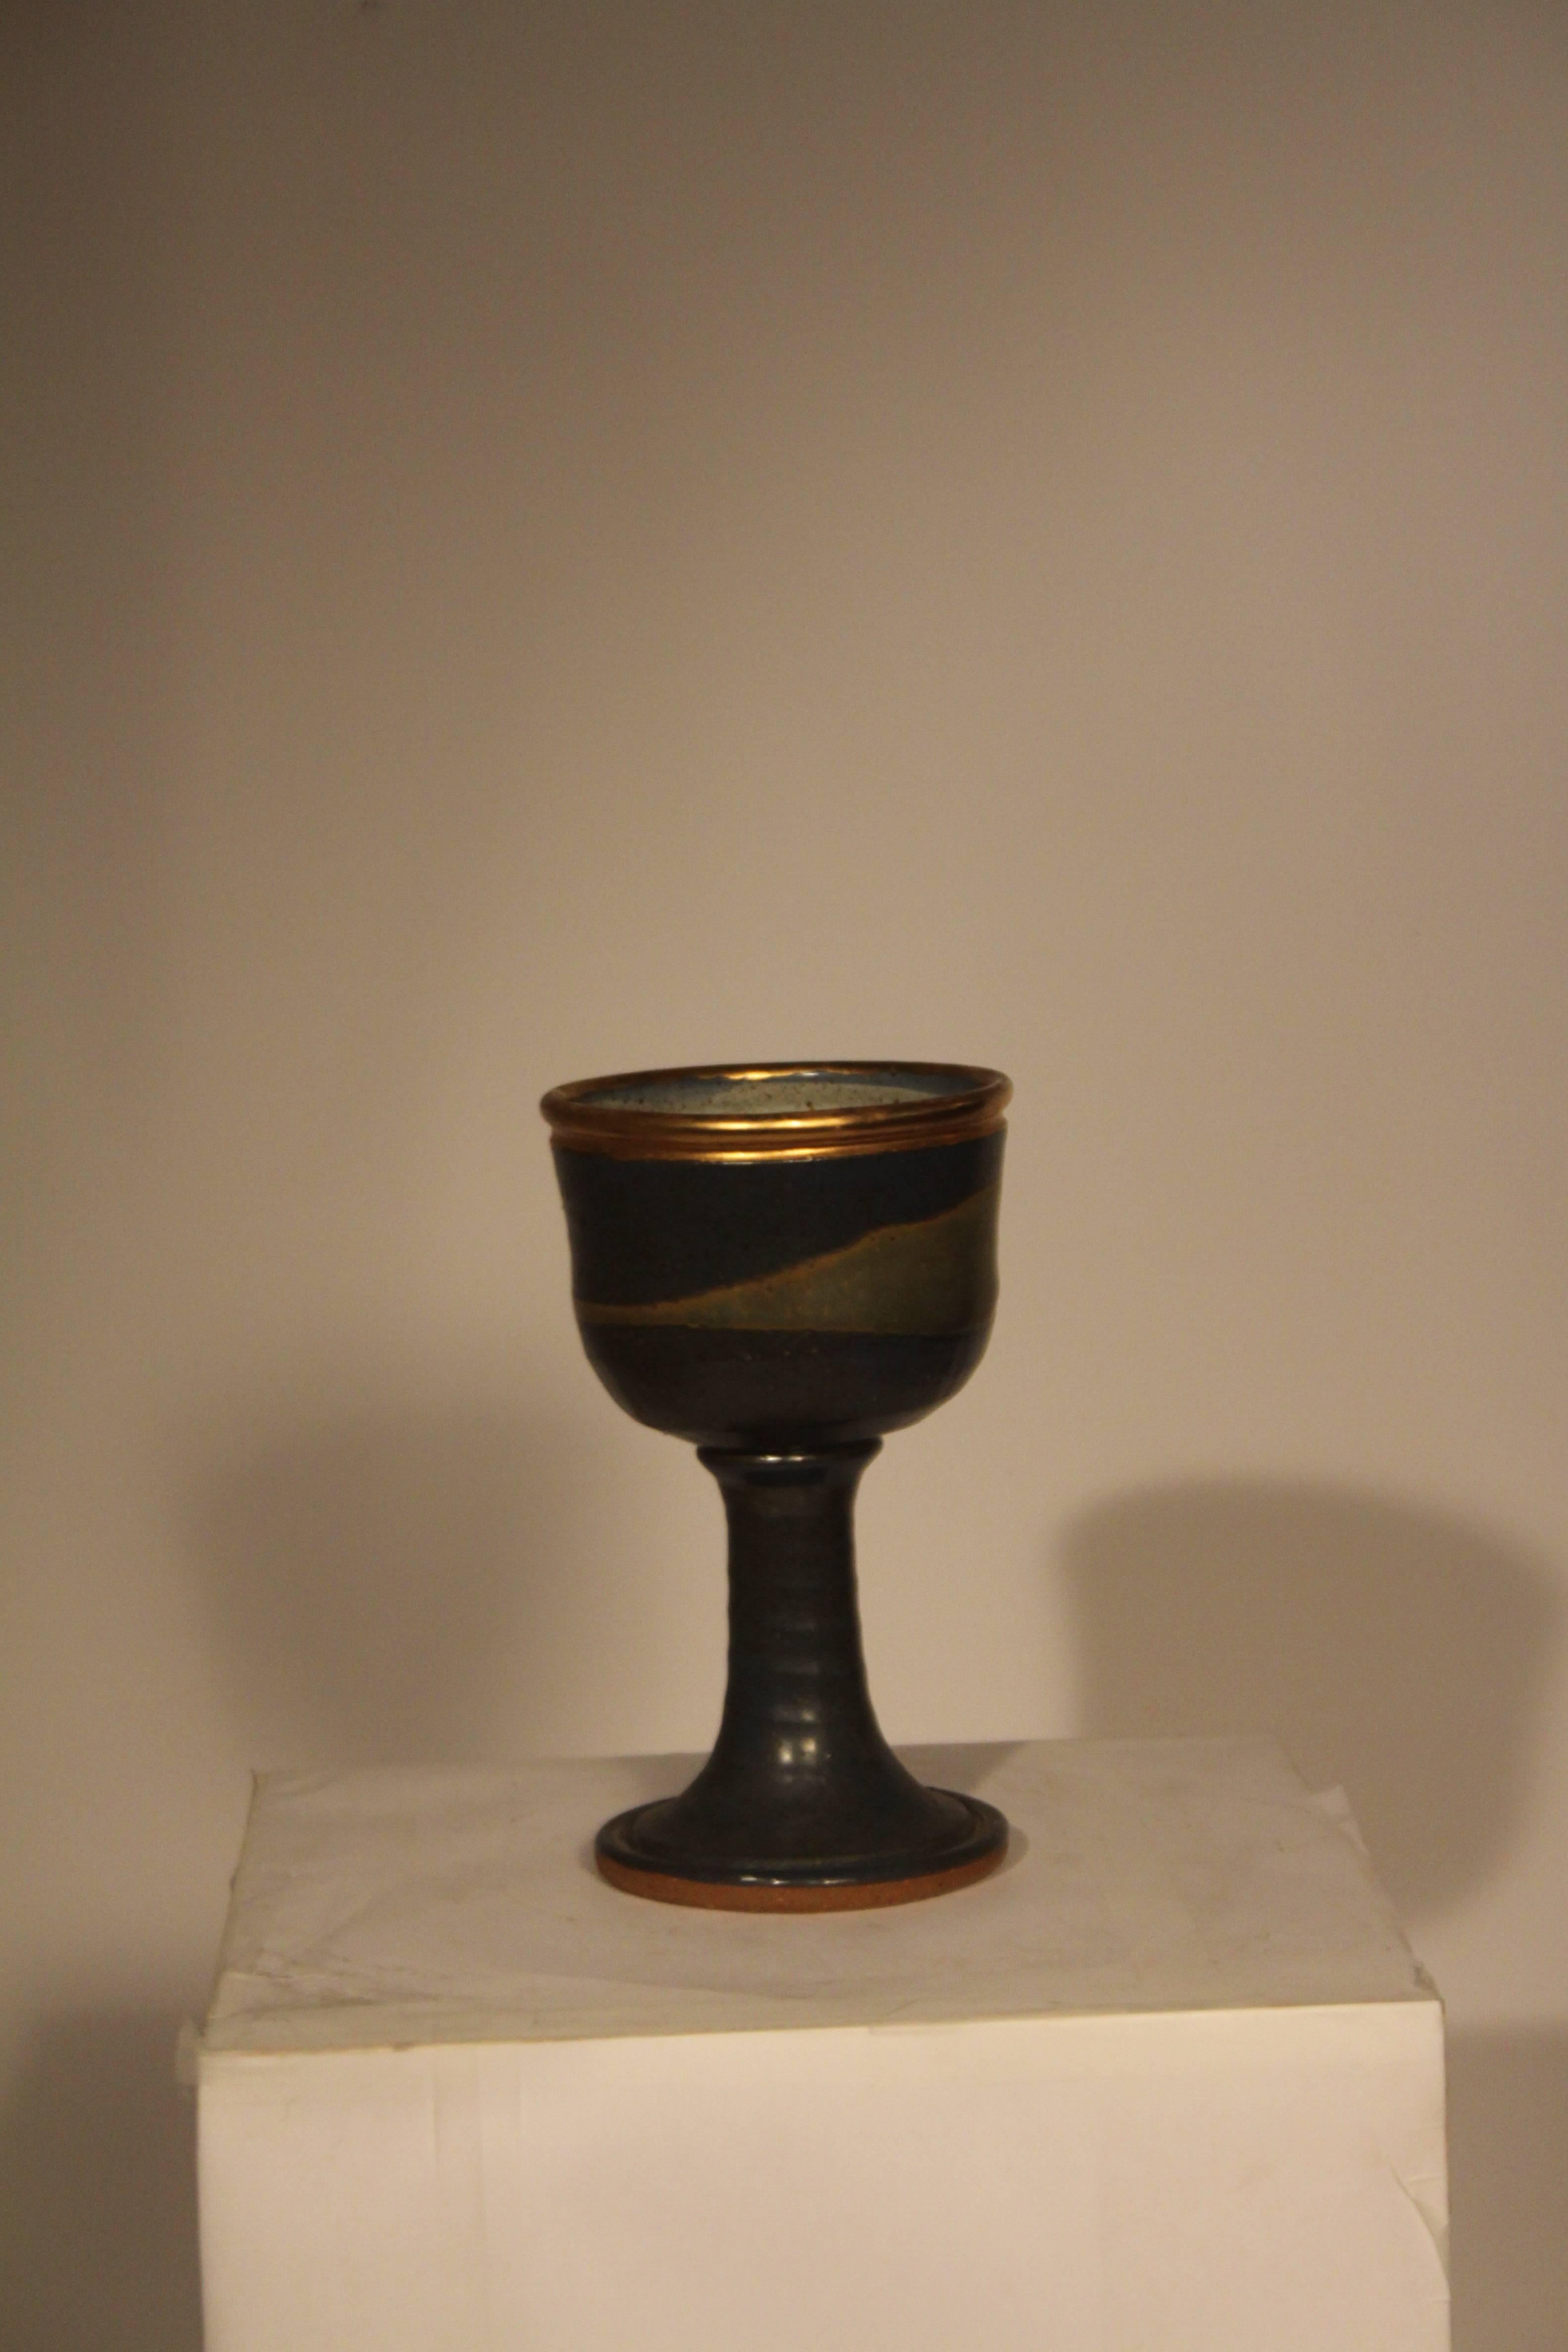 Large stoneware Chalice with blue/purple glaze and a gold luster rim. 
Signed with artists cipher. Possibly one of a kind, 1960s. Temple’s 
Pottery is in many museum collections internationally. He was part of 
the New Hope Studio School of